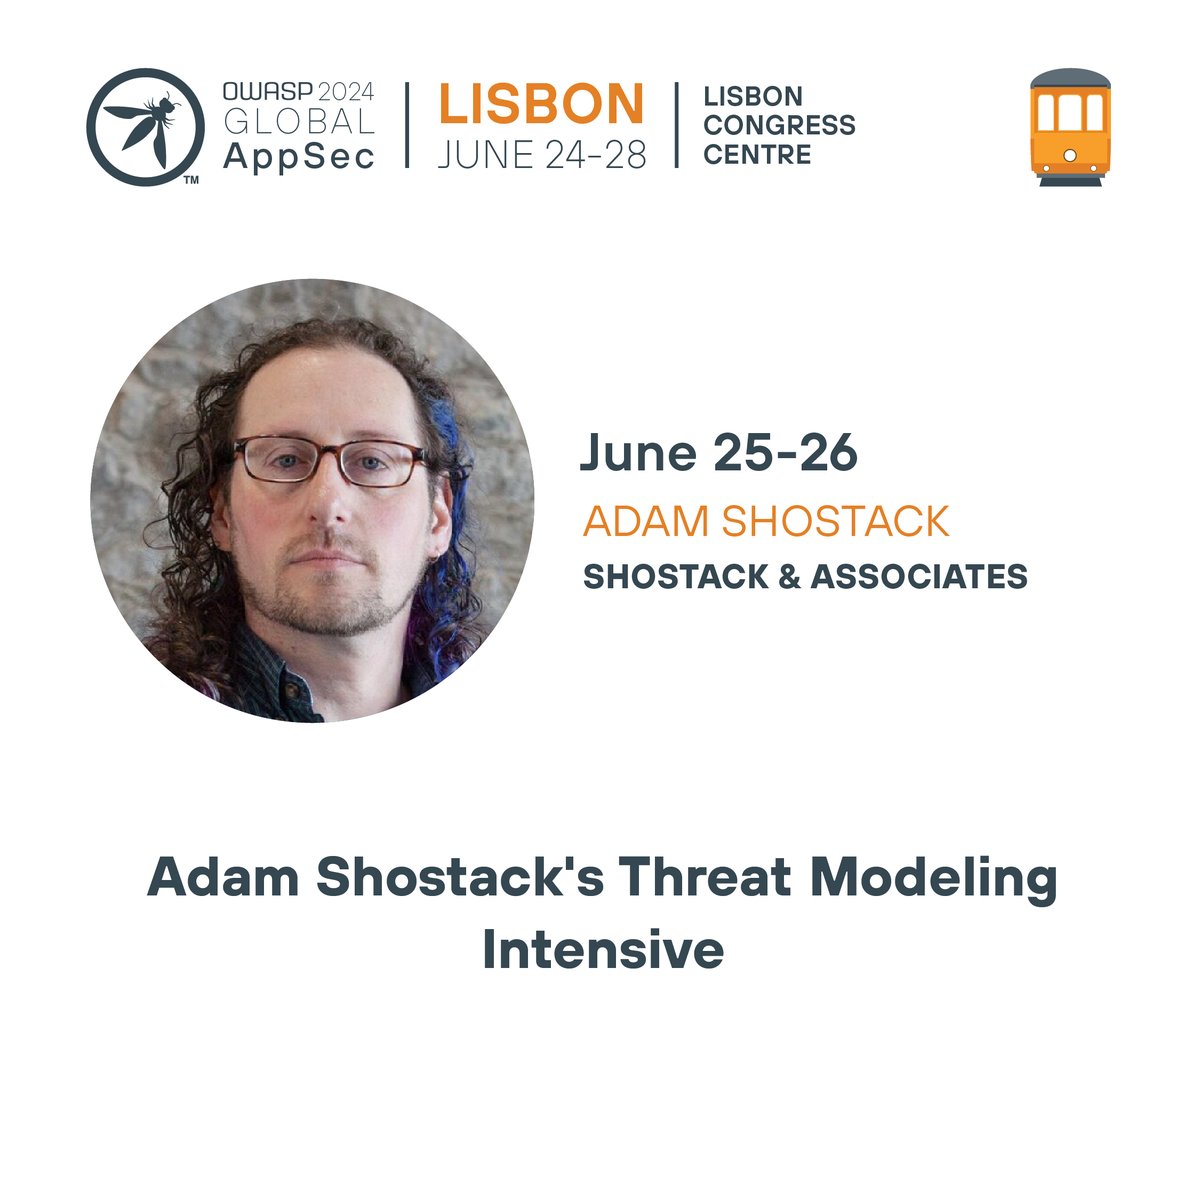 OWASP Global AppSec Lisbon 2024 is next month! @adamshostack is leading a 3 day training for appsec professionals starting Tuesday, 6/25 focused on Threat Modeling that you don't want to miss. Register now⬇️ ecs.page.link/8R8JH #lisbon #portugal #threatmodeling #infosec